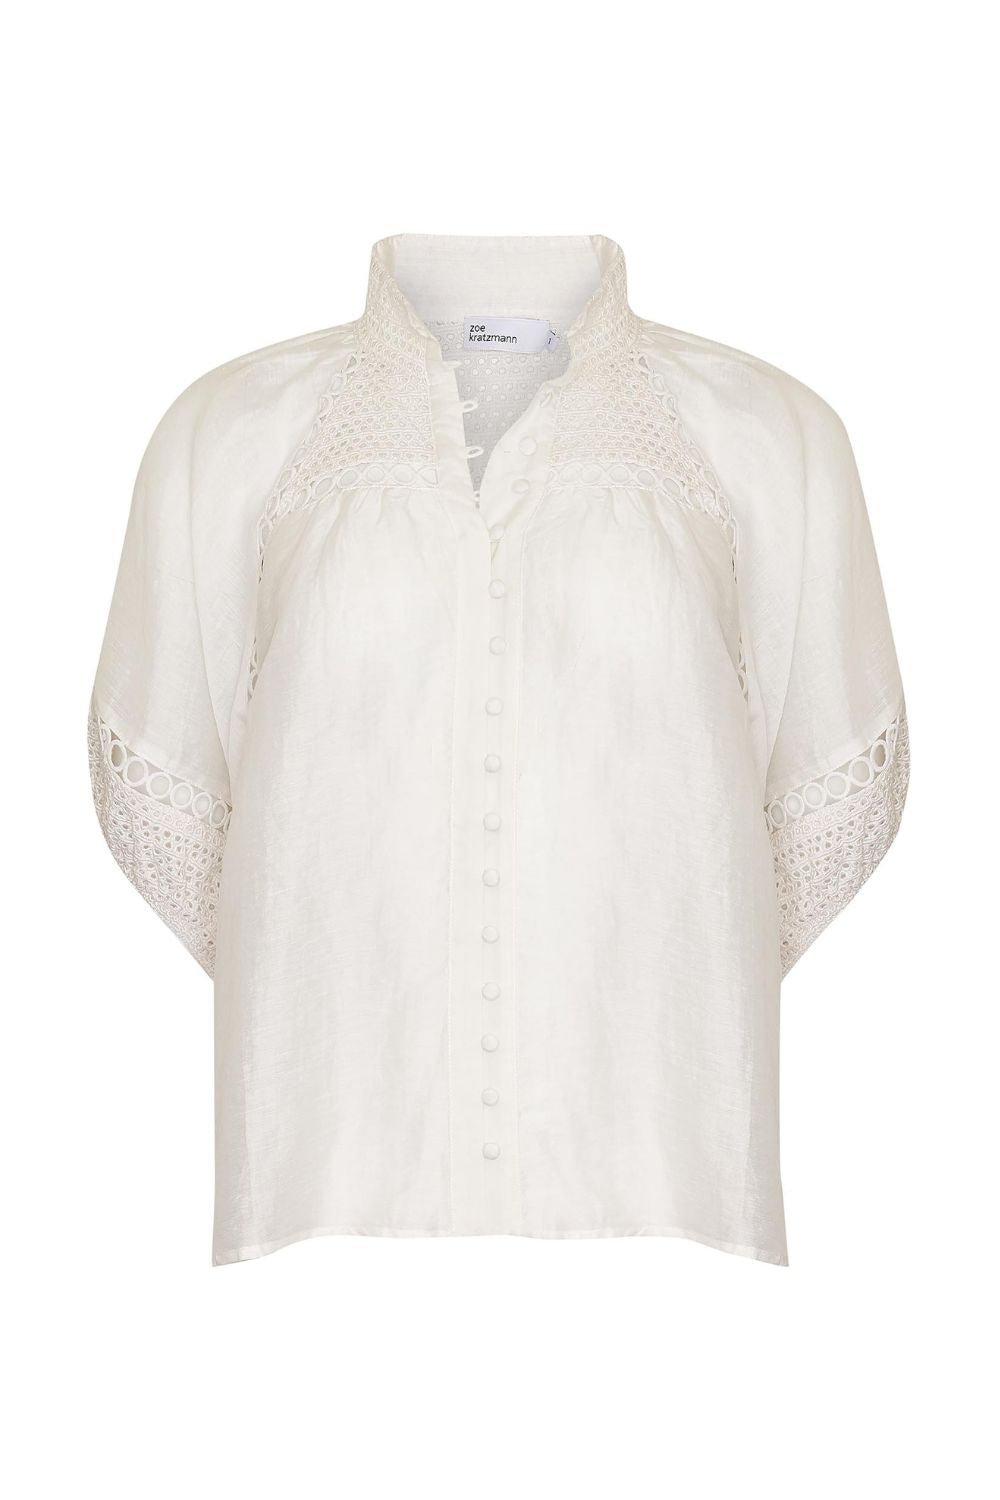 white, top, high neck, mid-length sleeve, covered buttons, circular lace detailing, product image